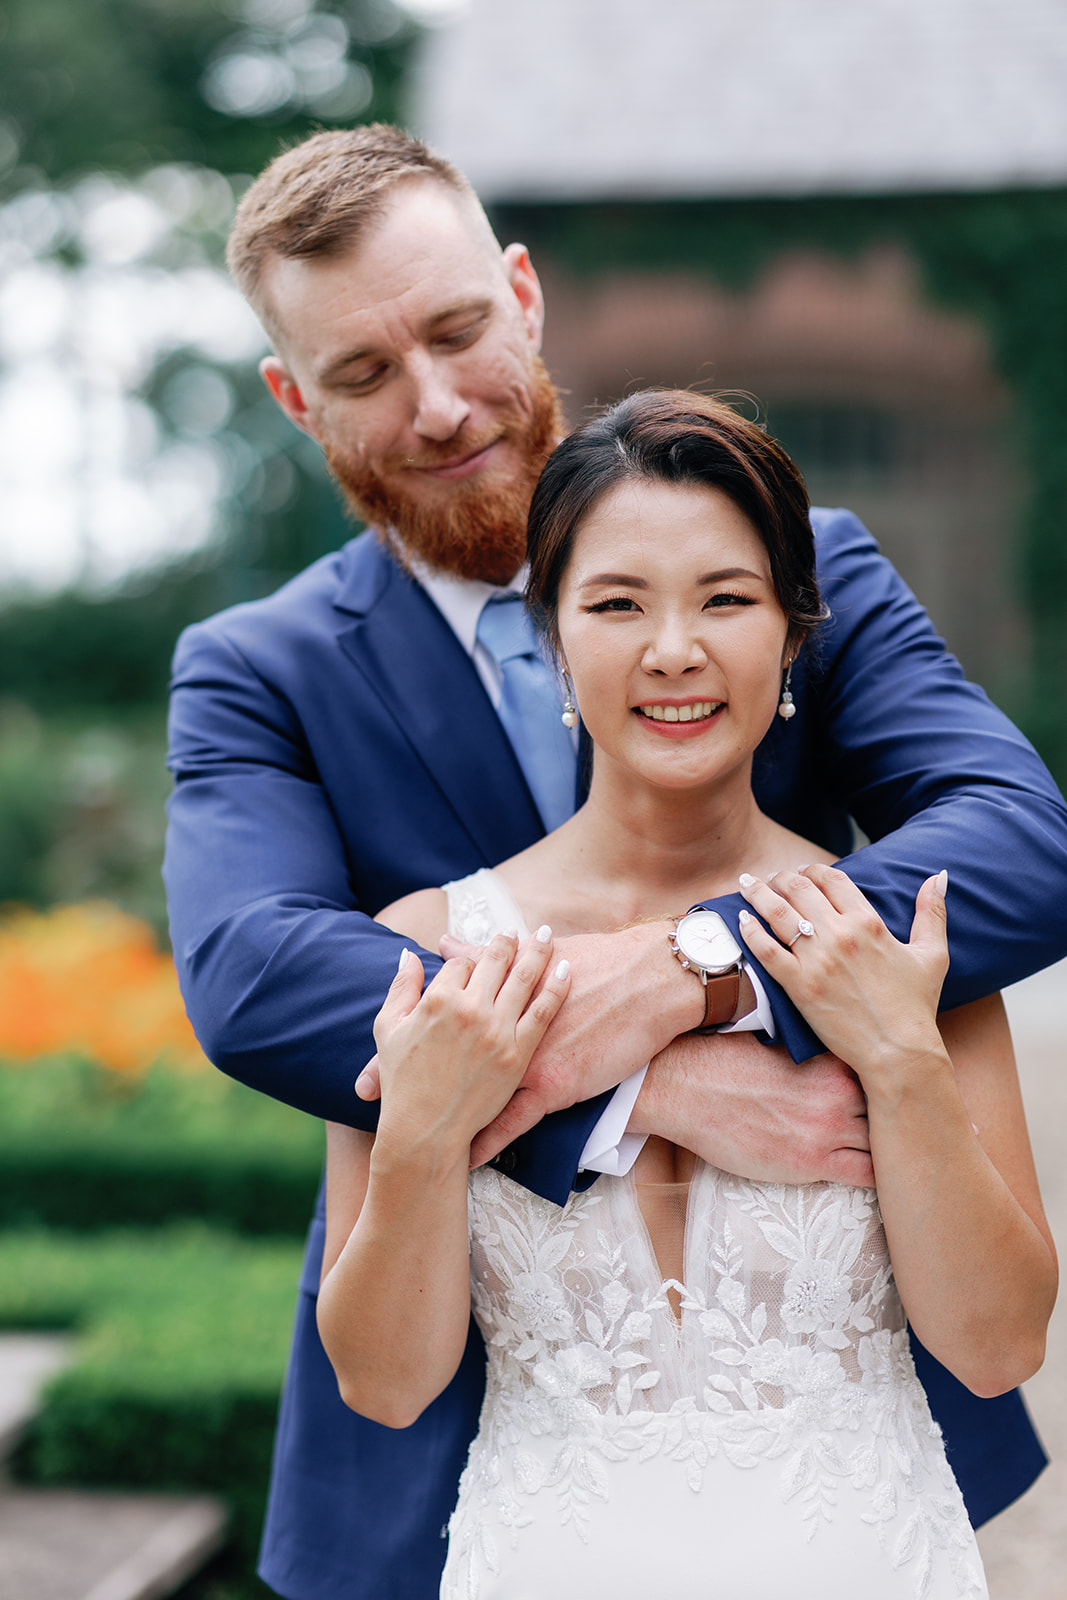 A groom in a blue suit hugs his bride from behind while standing in a garden